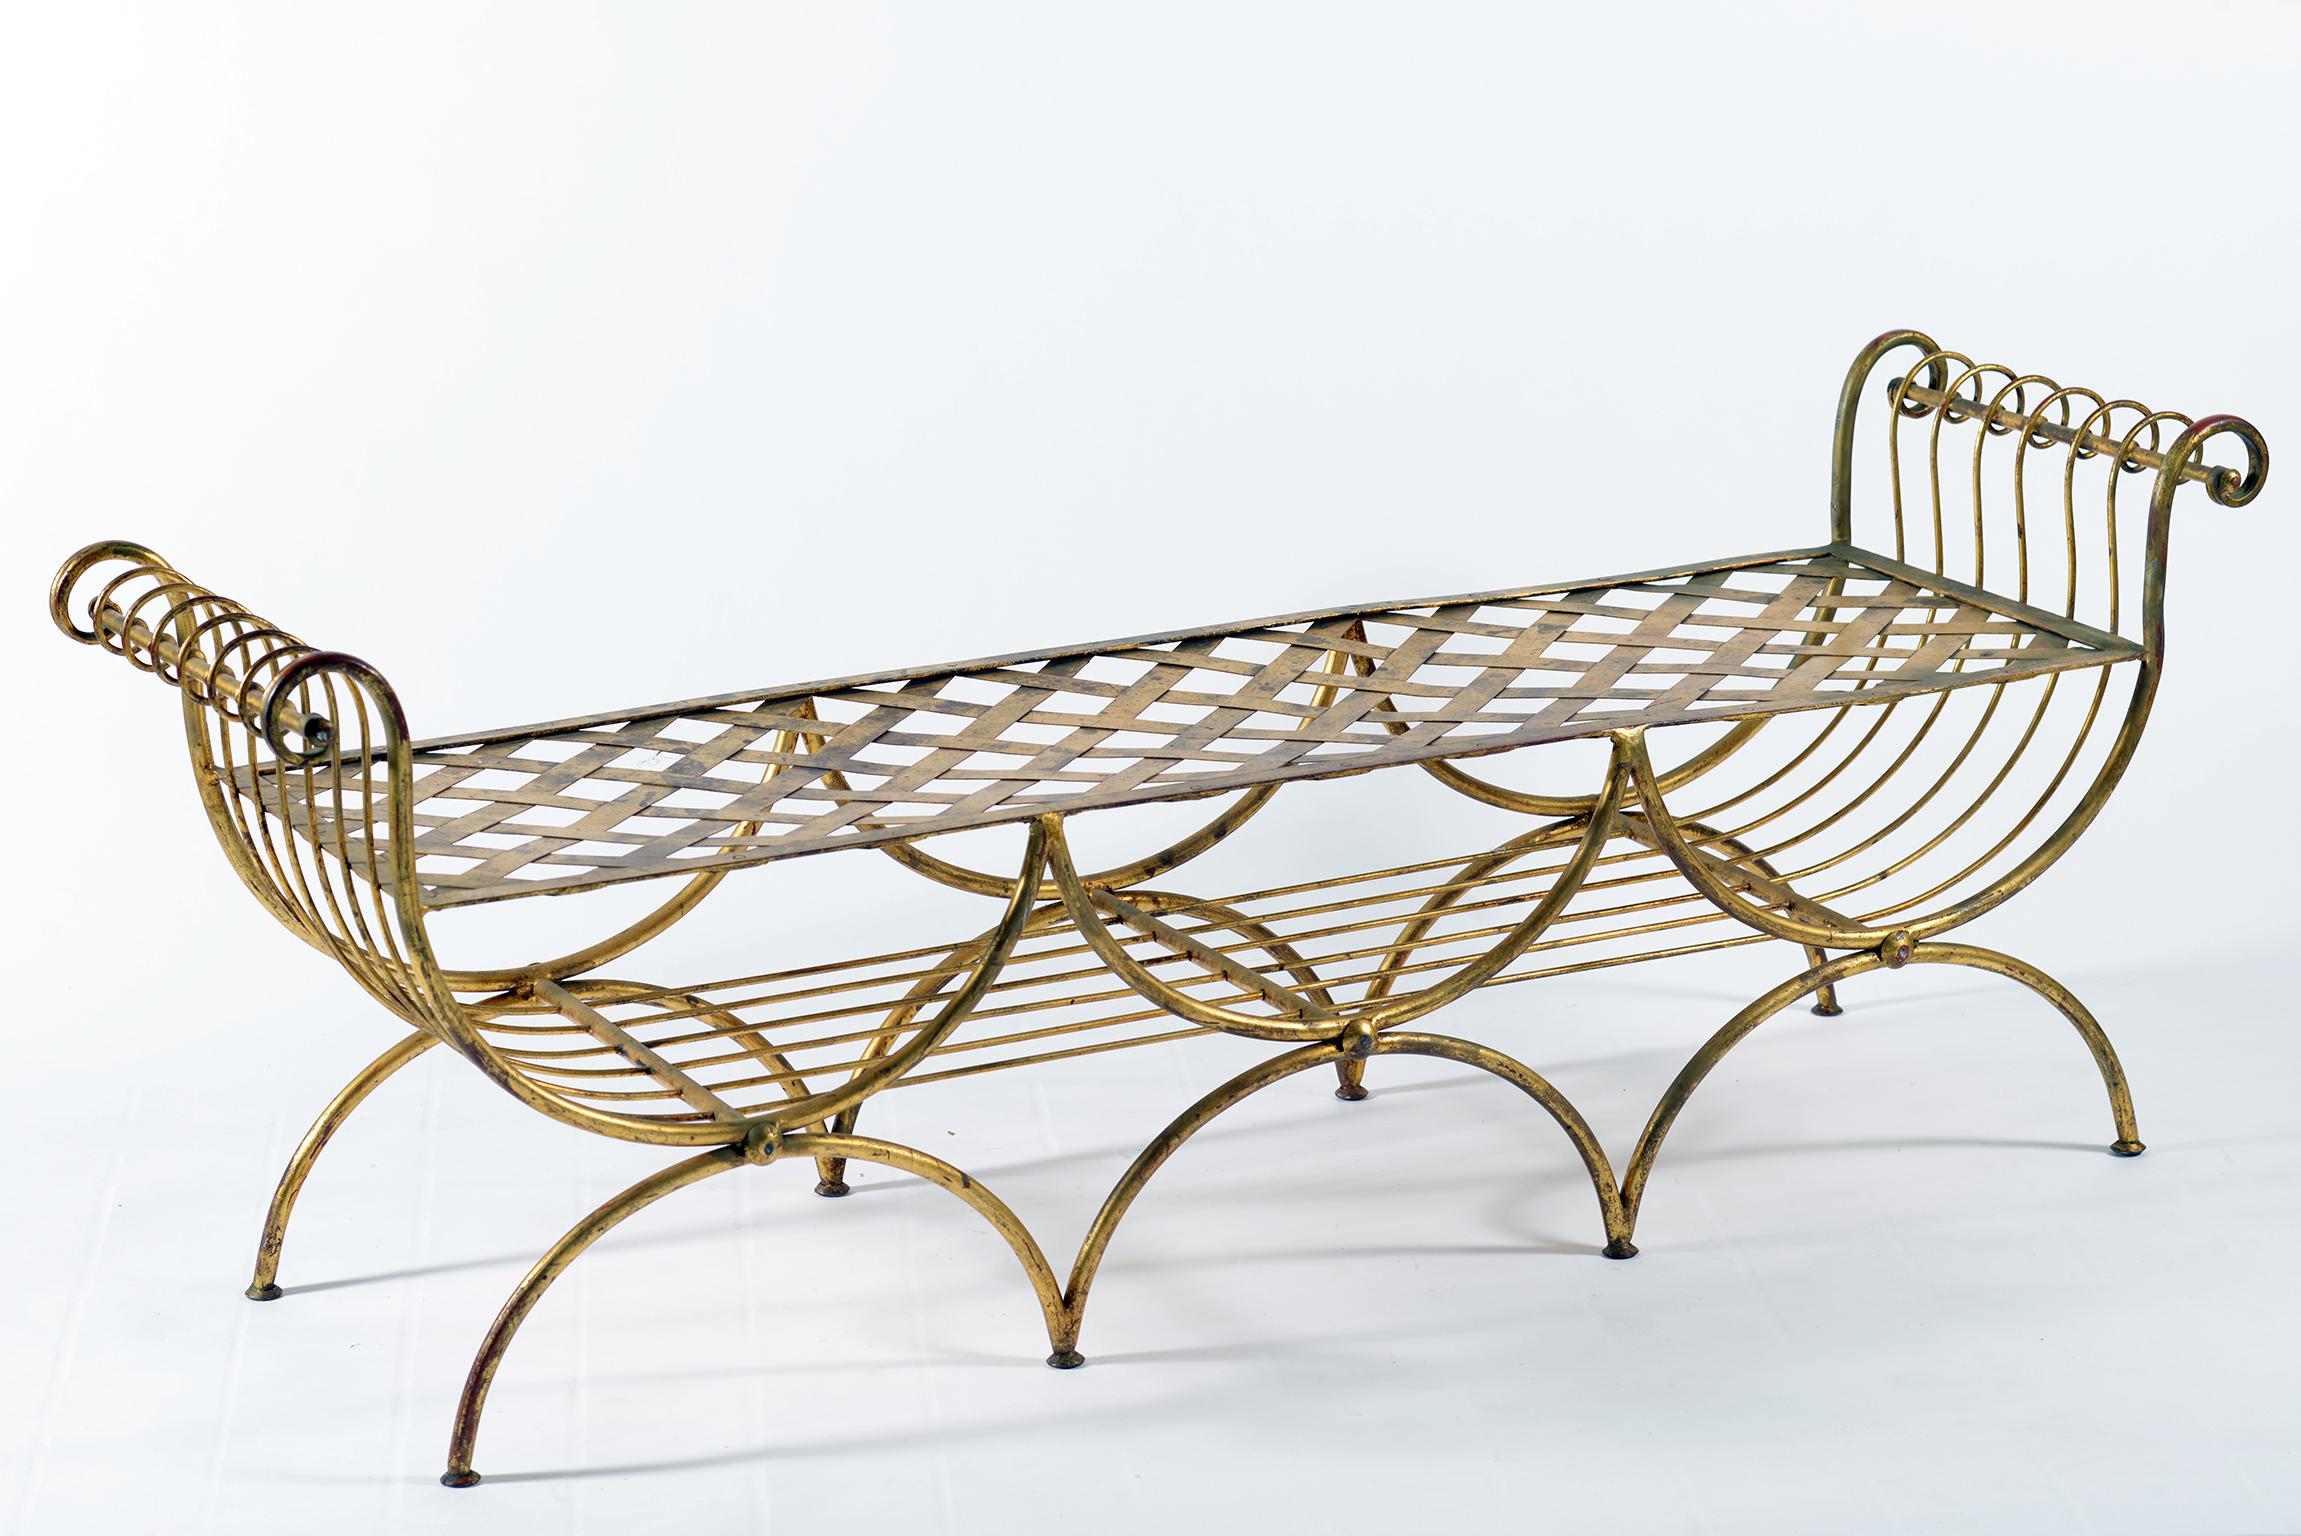 This handwrought iron bench has three legs supporting an arch on the front and back and two sort of curled arms with the seat woven with flat iron elements.
The bench can be used without a pillow or it is possible to make a fabric cushion.
The